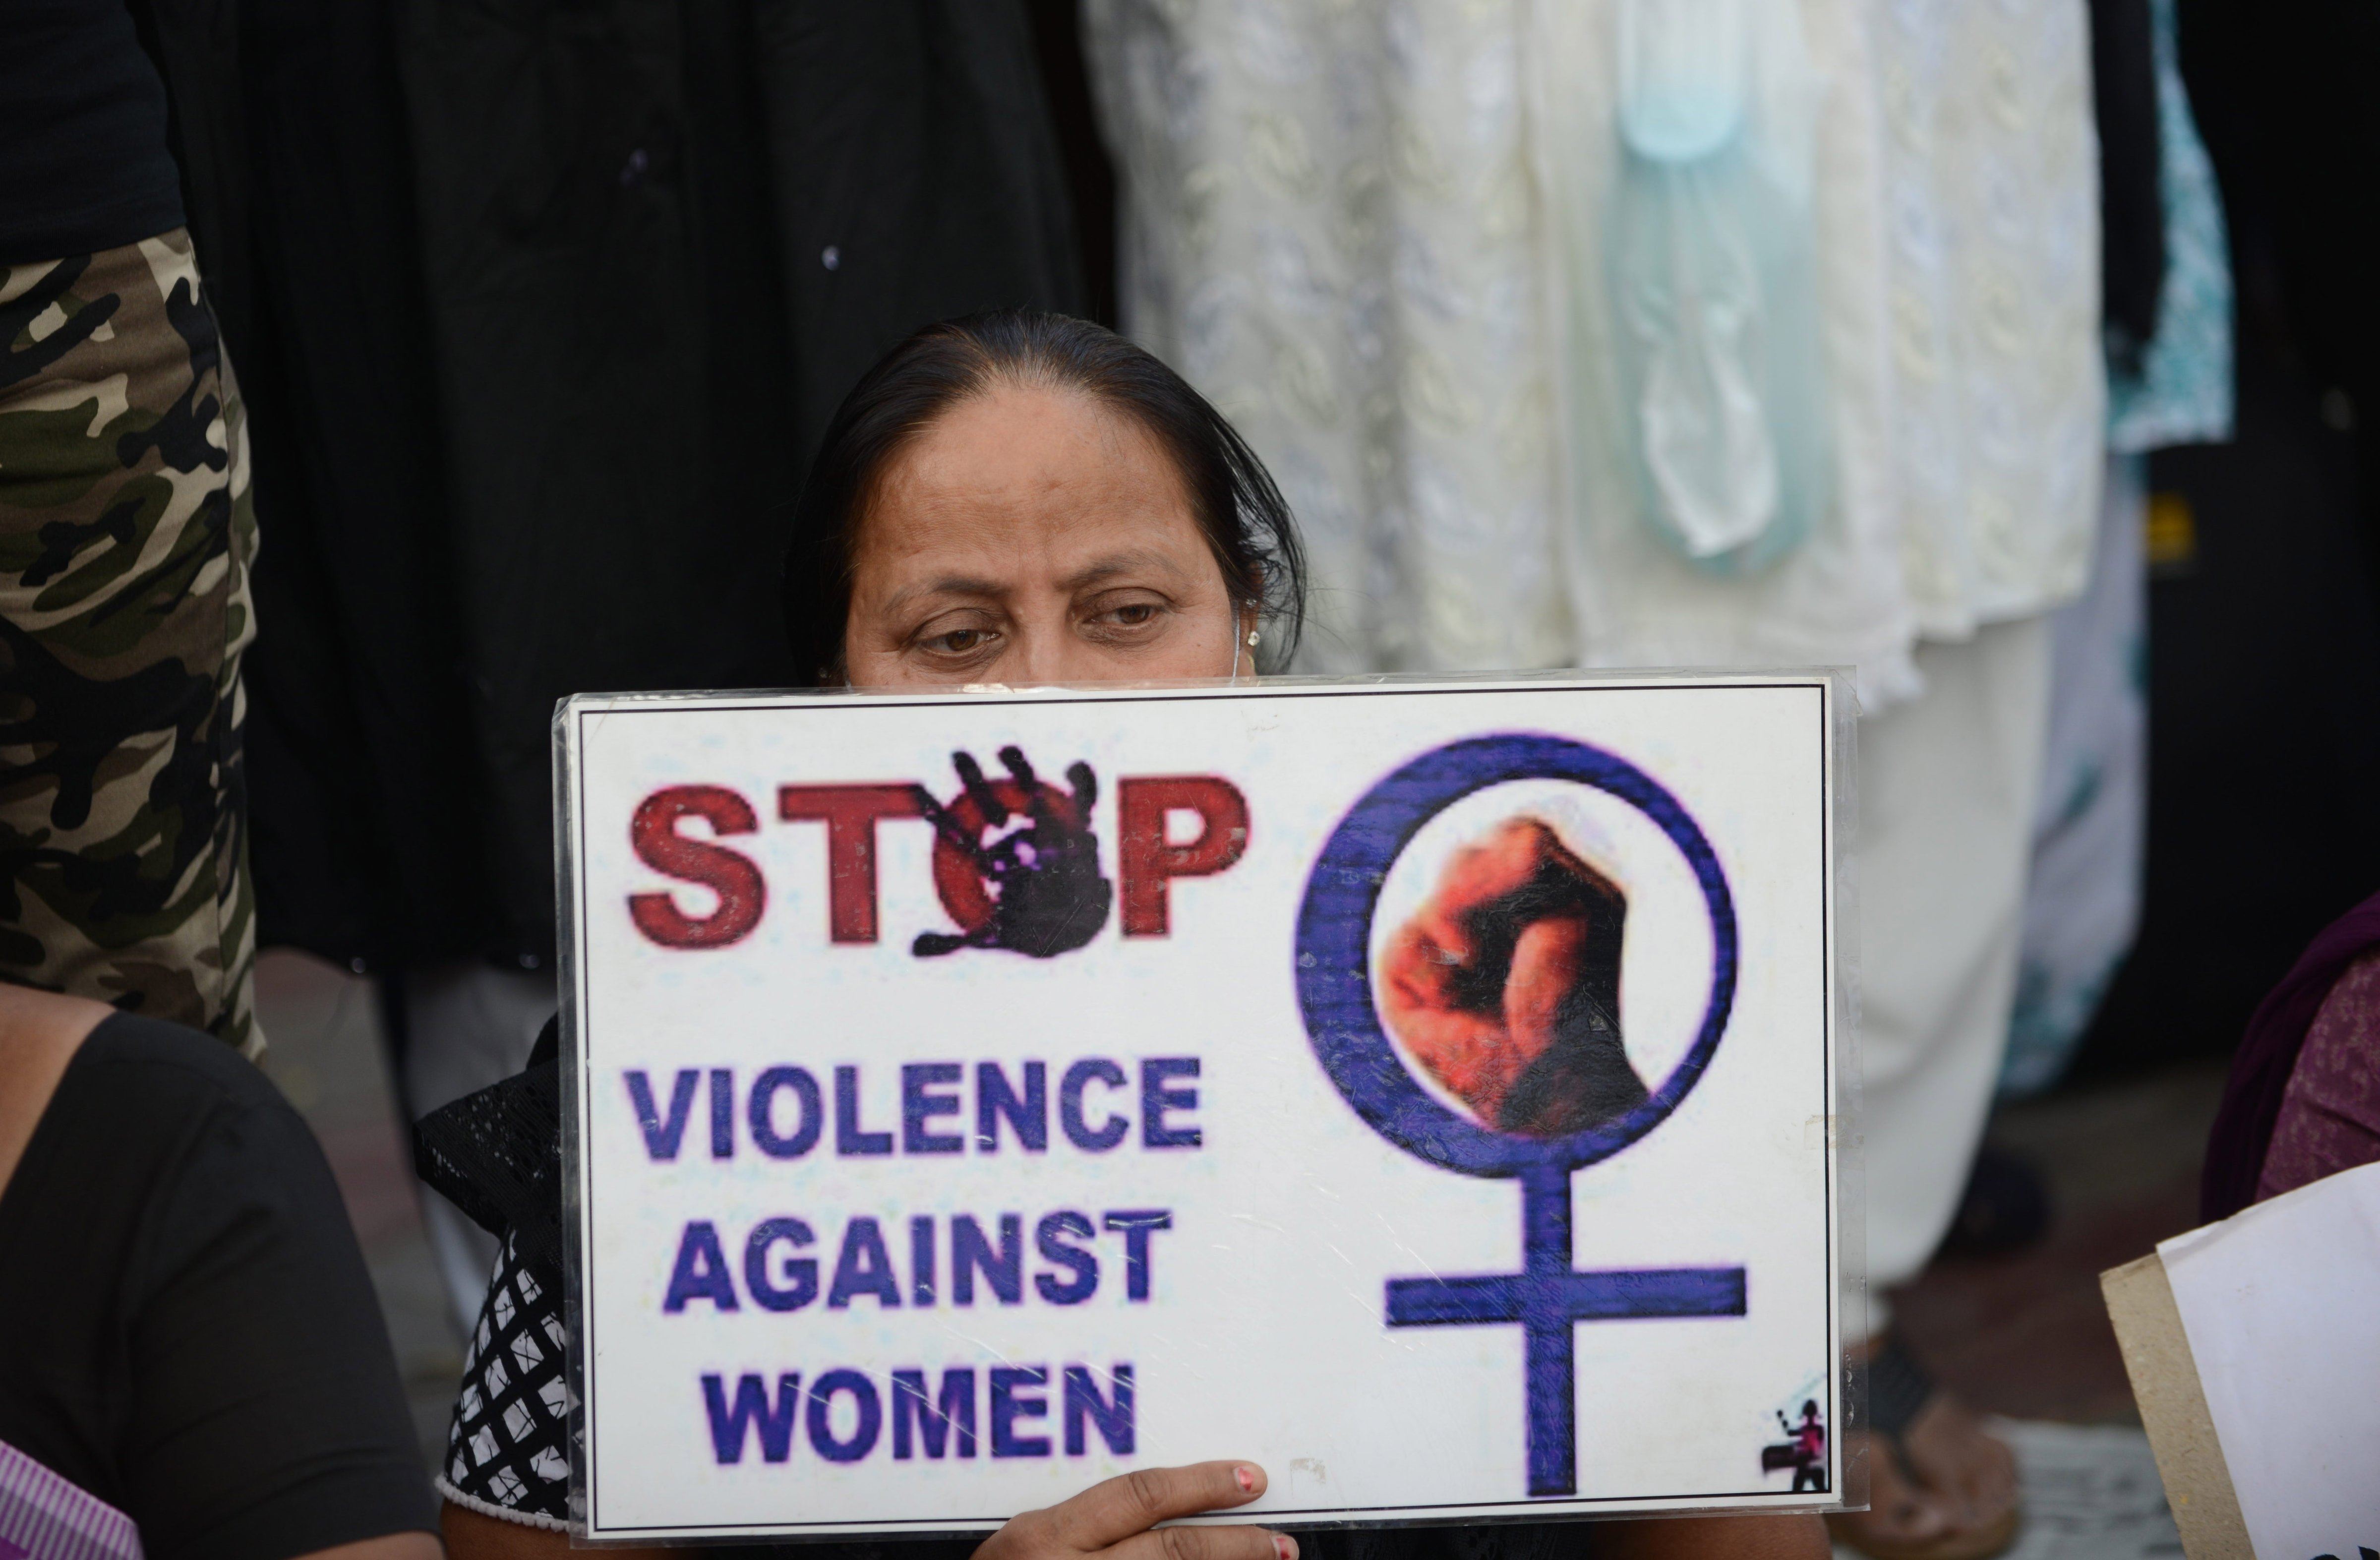 A woman attends a peace protest in Ahmedabad on March 20, 2015, in the wake of the gang-rape on an elderly nun. (SAM PANTHAKY—AFP/Getty Images)